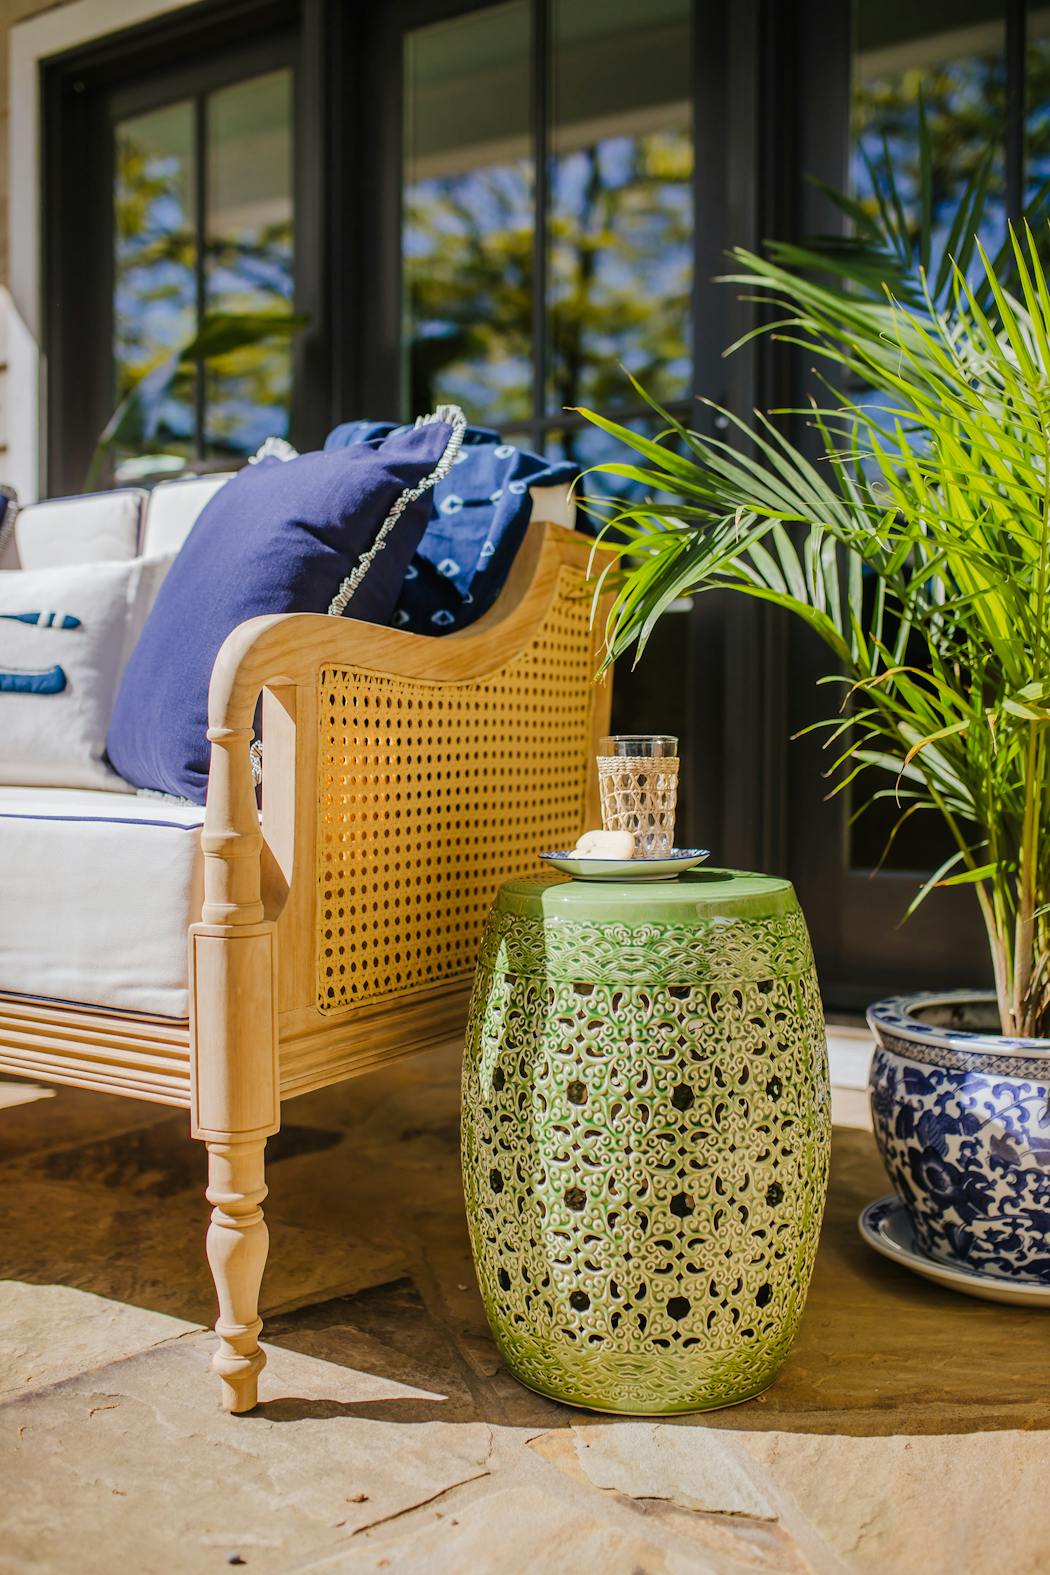 Few things complete an outdoor space like a set of garden stools and a group of beautiful outdoor pillows.